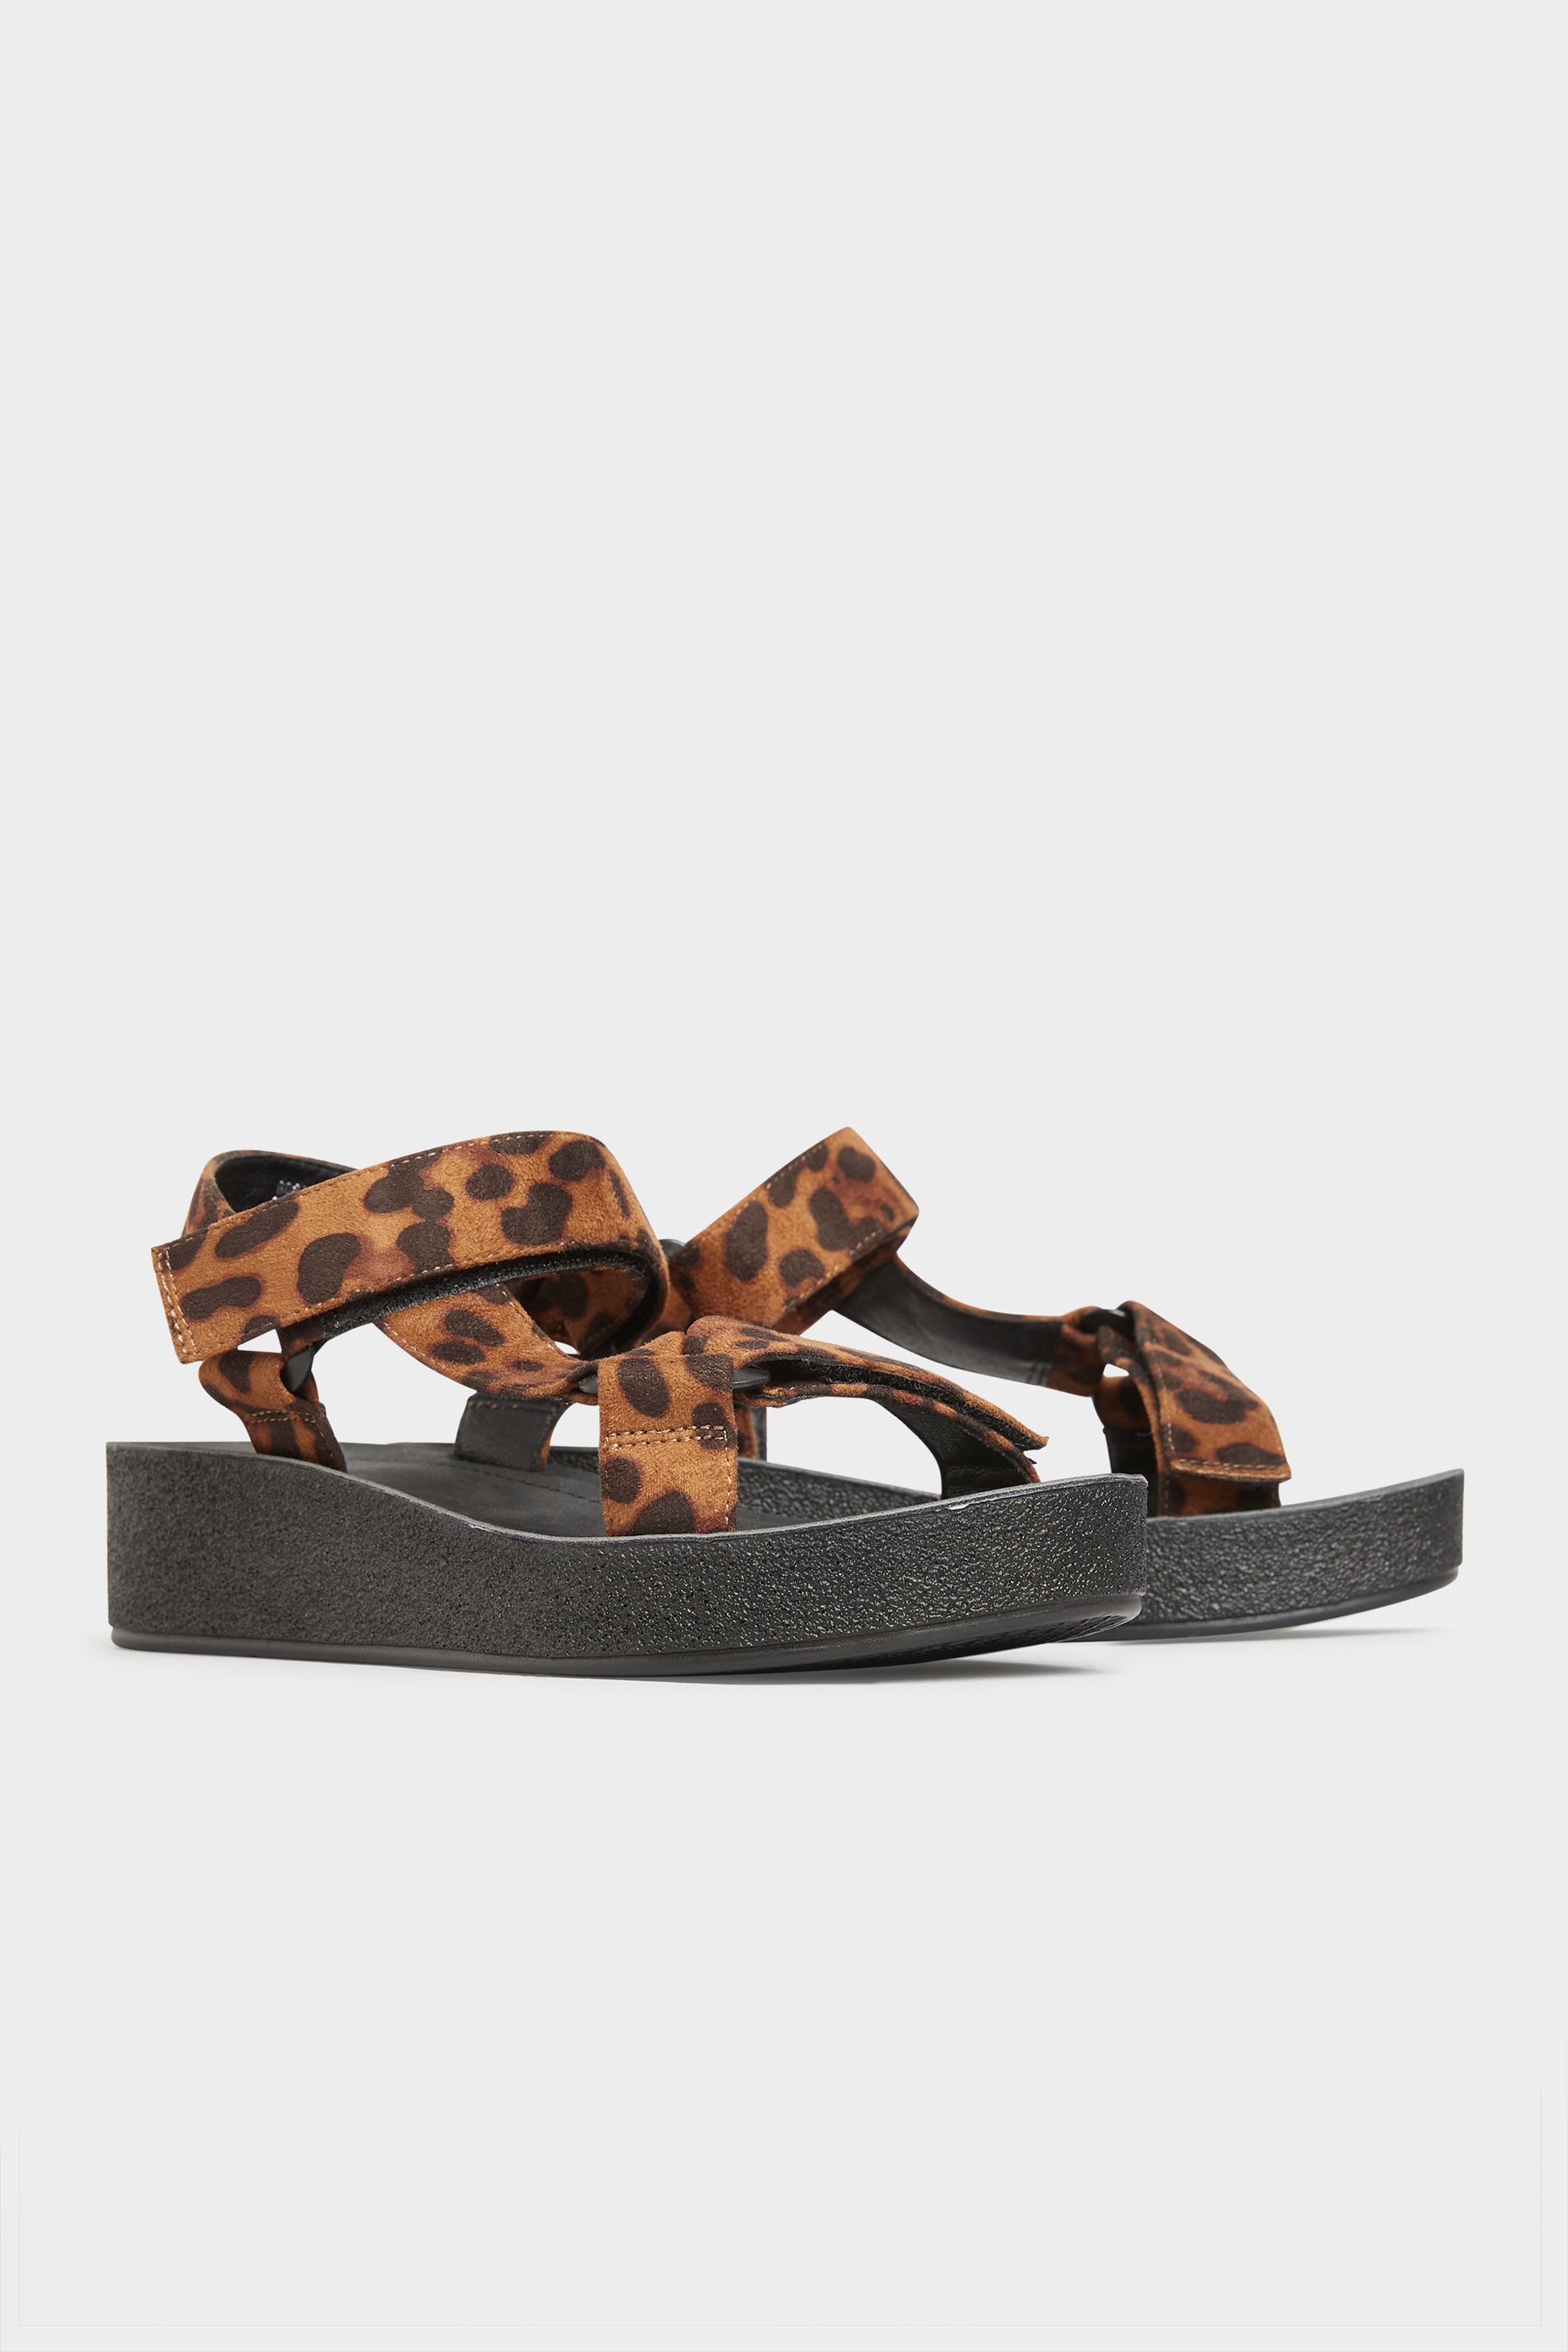 LIMITED COLLECTION Black Leopard Print Sporty Platform Sandals In Extra Wide Fit_B.jpg